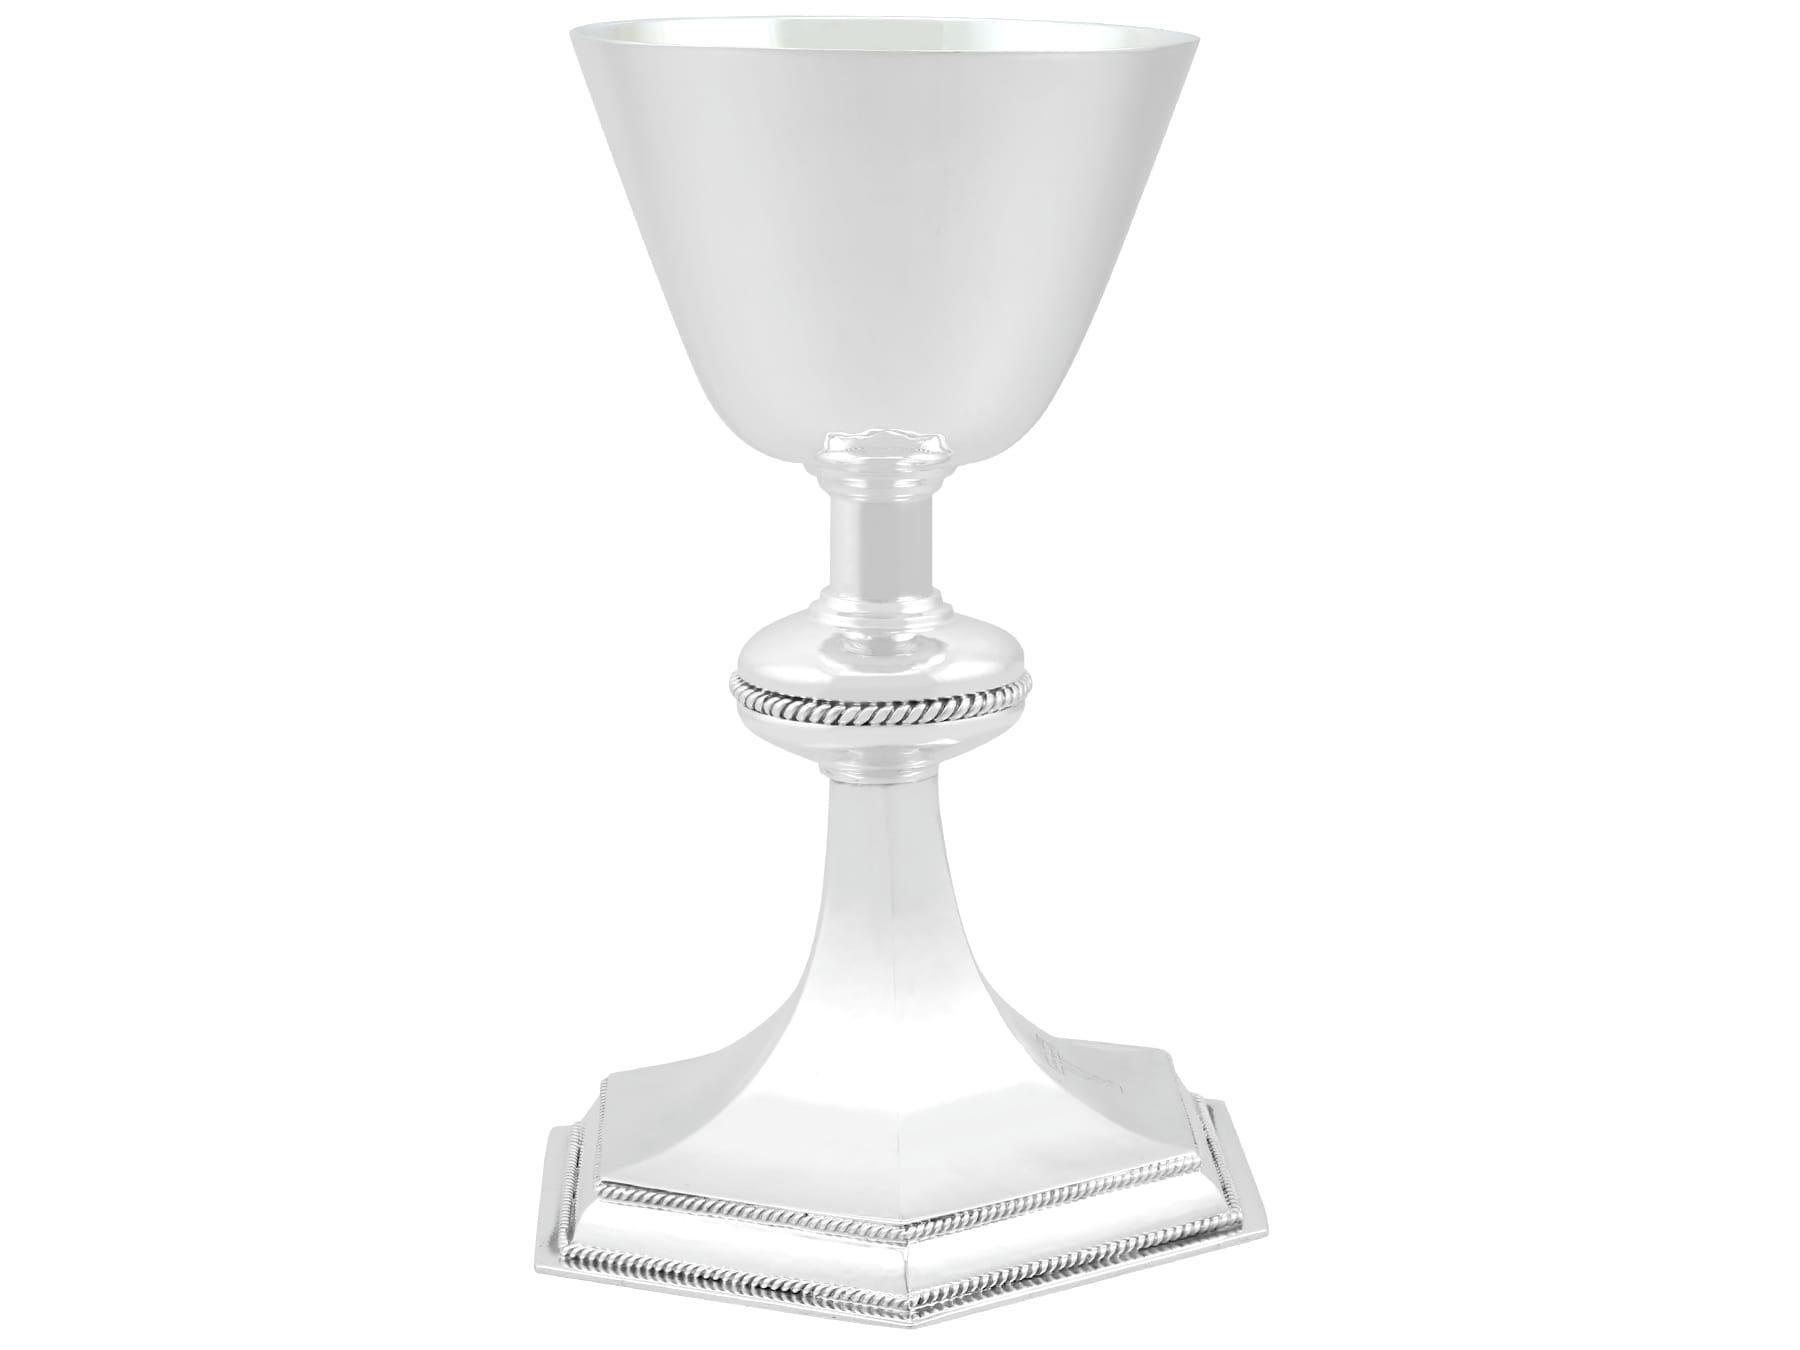 An exceptional, fine and impressive vintage George VI English sterling silver chalice; an addition to our religious silverware collection

This exceptional antique 1930's silver chalice, in sterling standard, has a circular bell-shaped form onto a